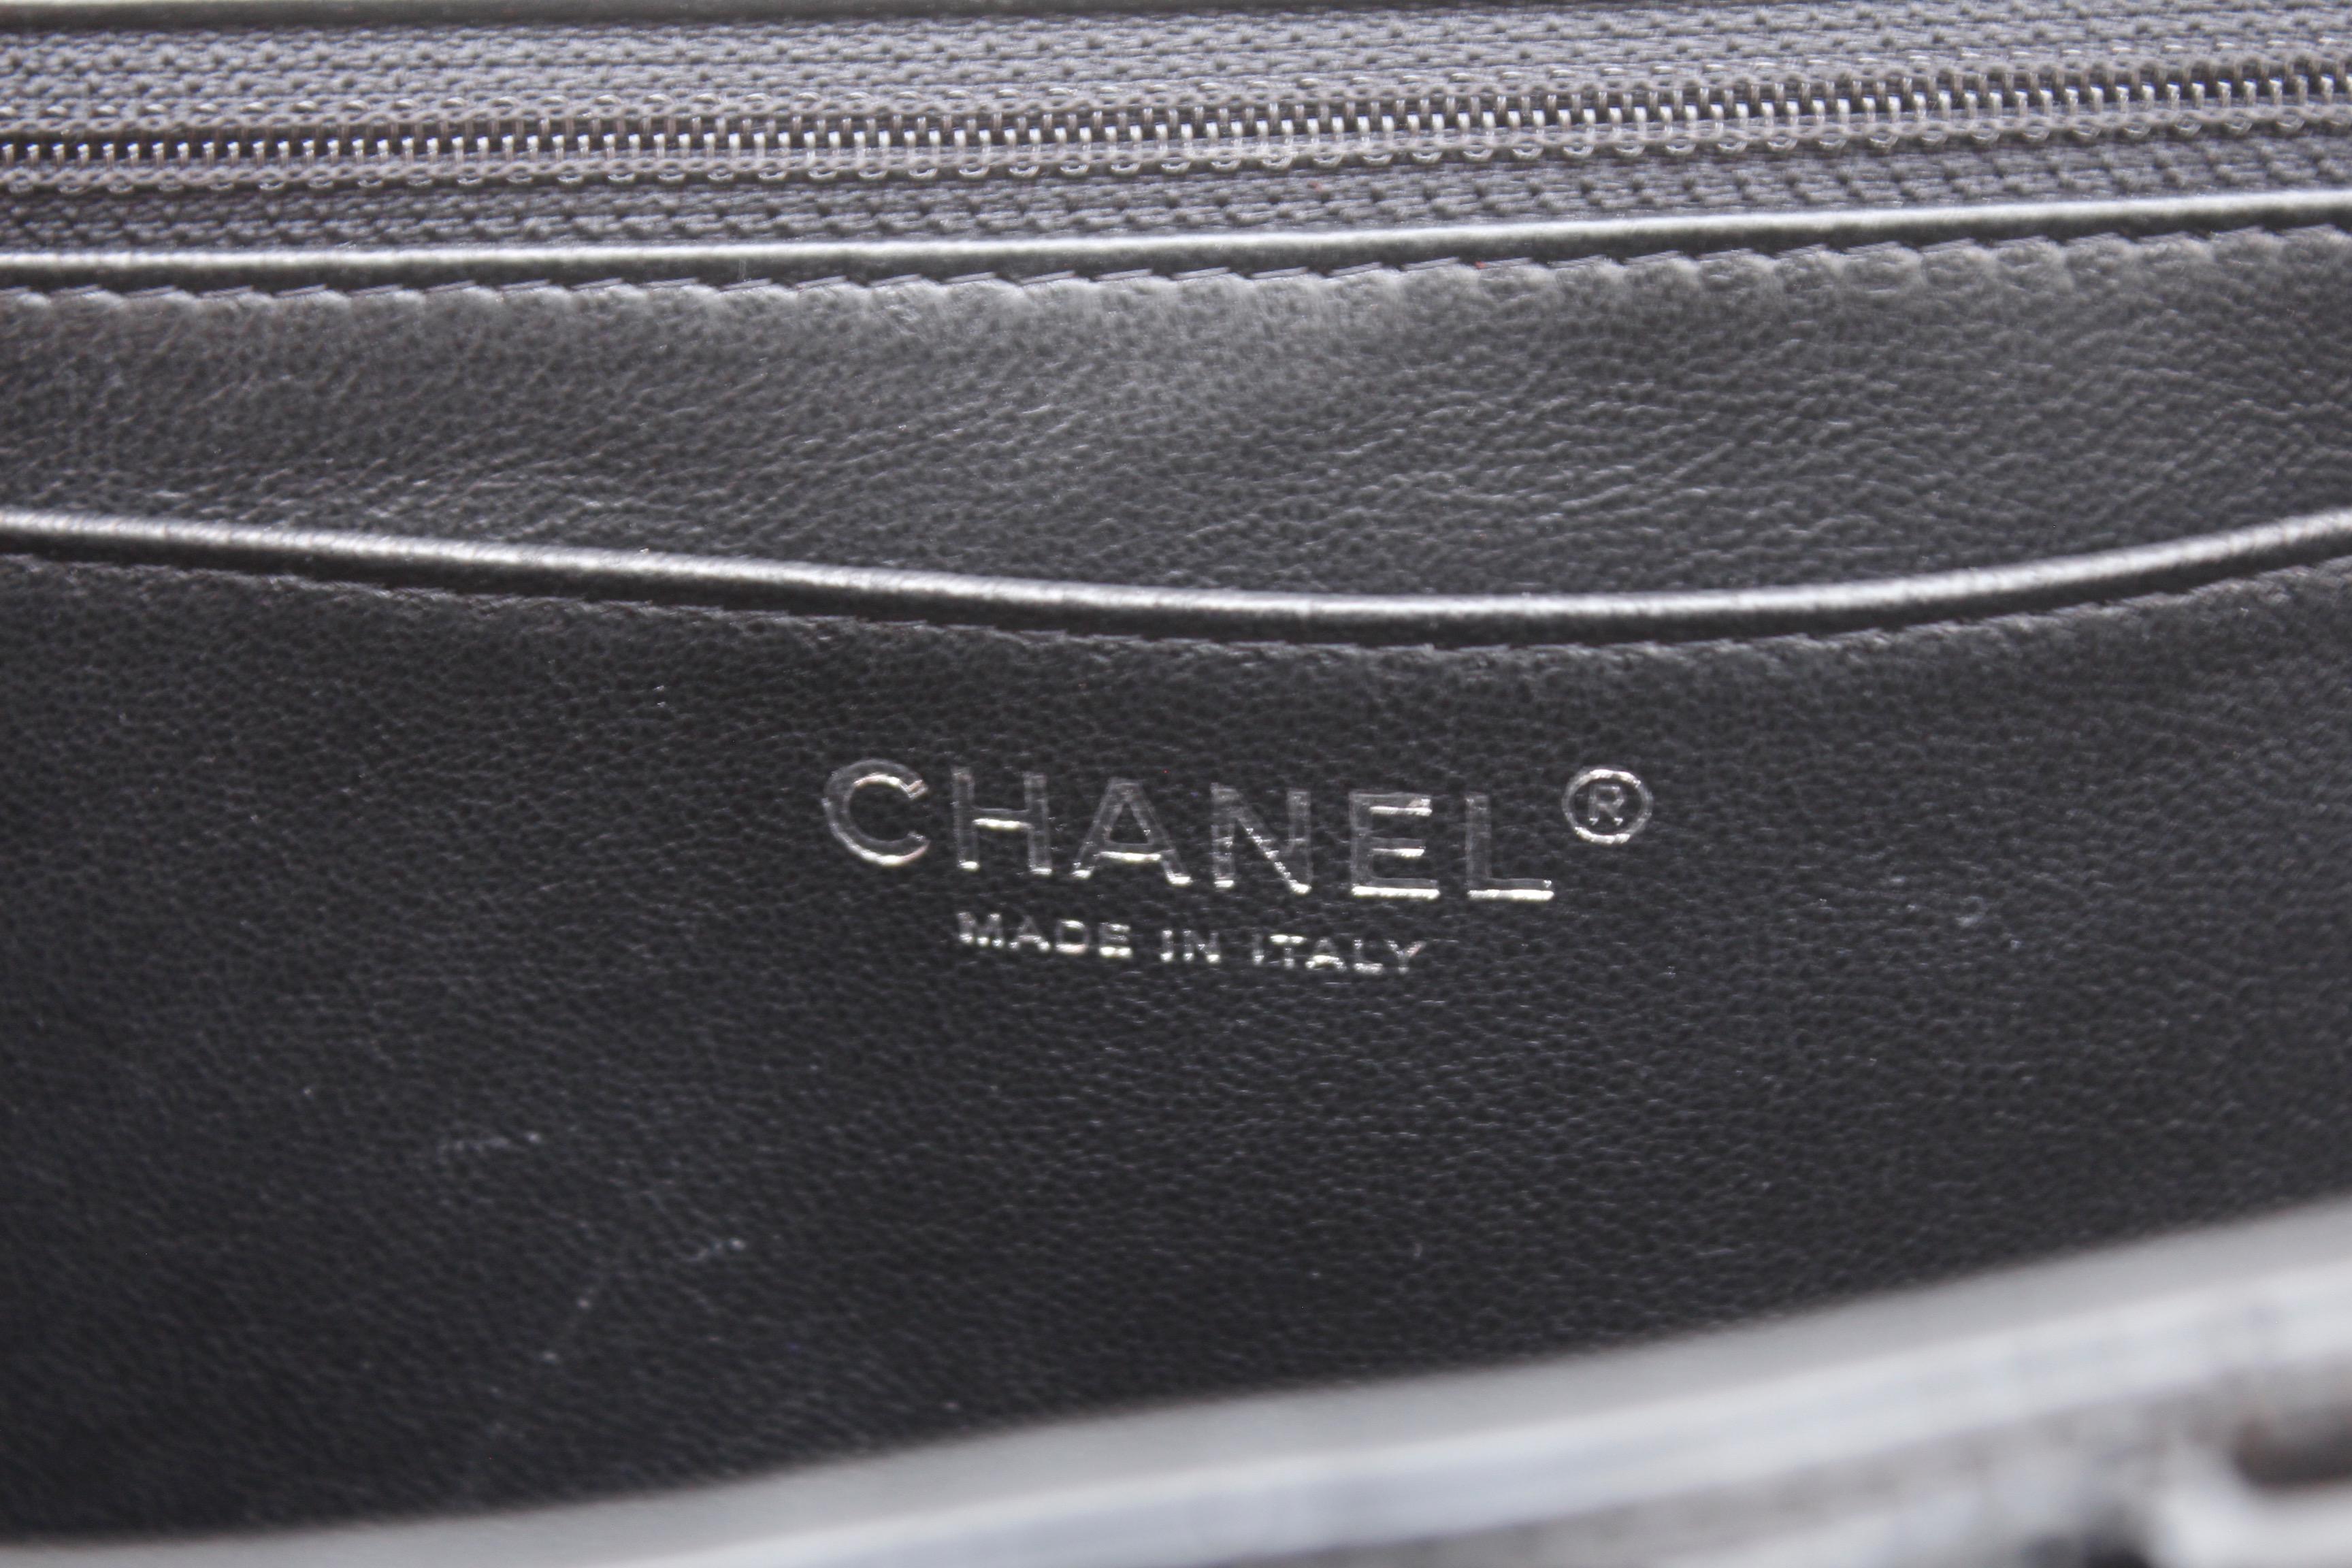 Chanel gorgeous black patent leather, 2009 – 2010 8